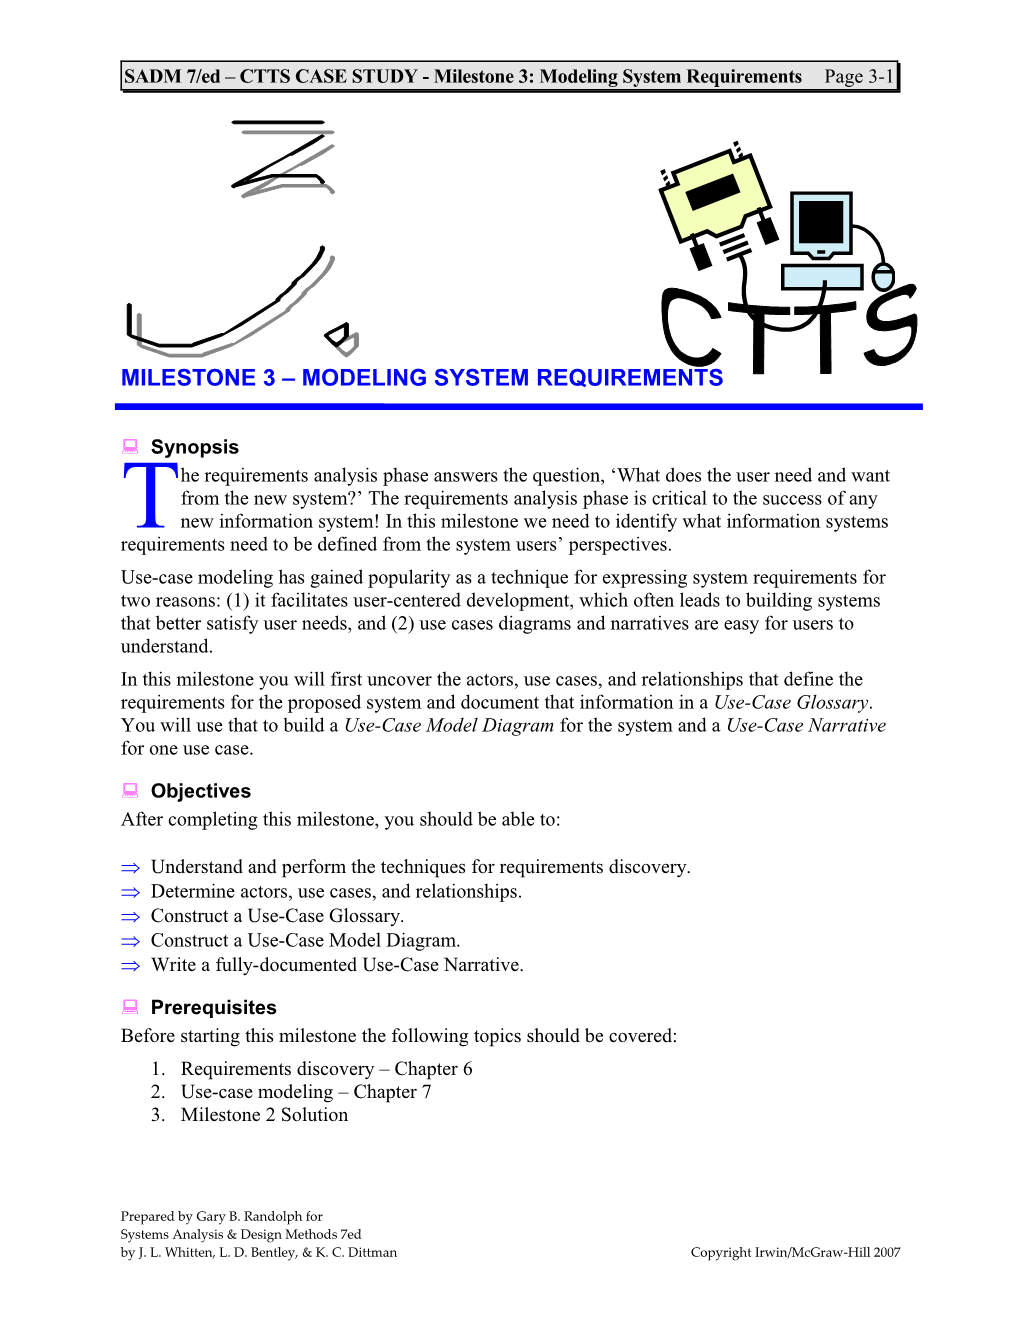 SADM 7/Ed CTTS CASE STUDY - Milestone 3: Modeling System Requirements Page 3-1